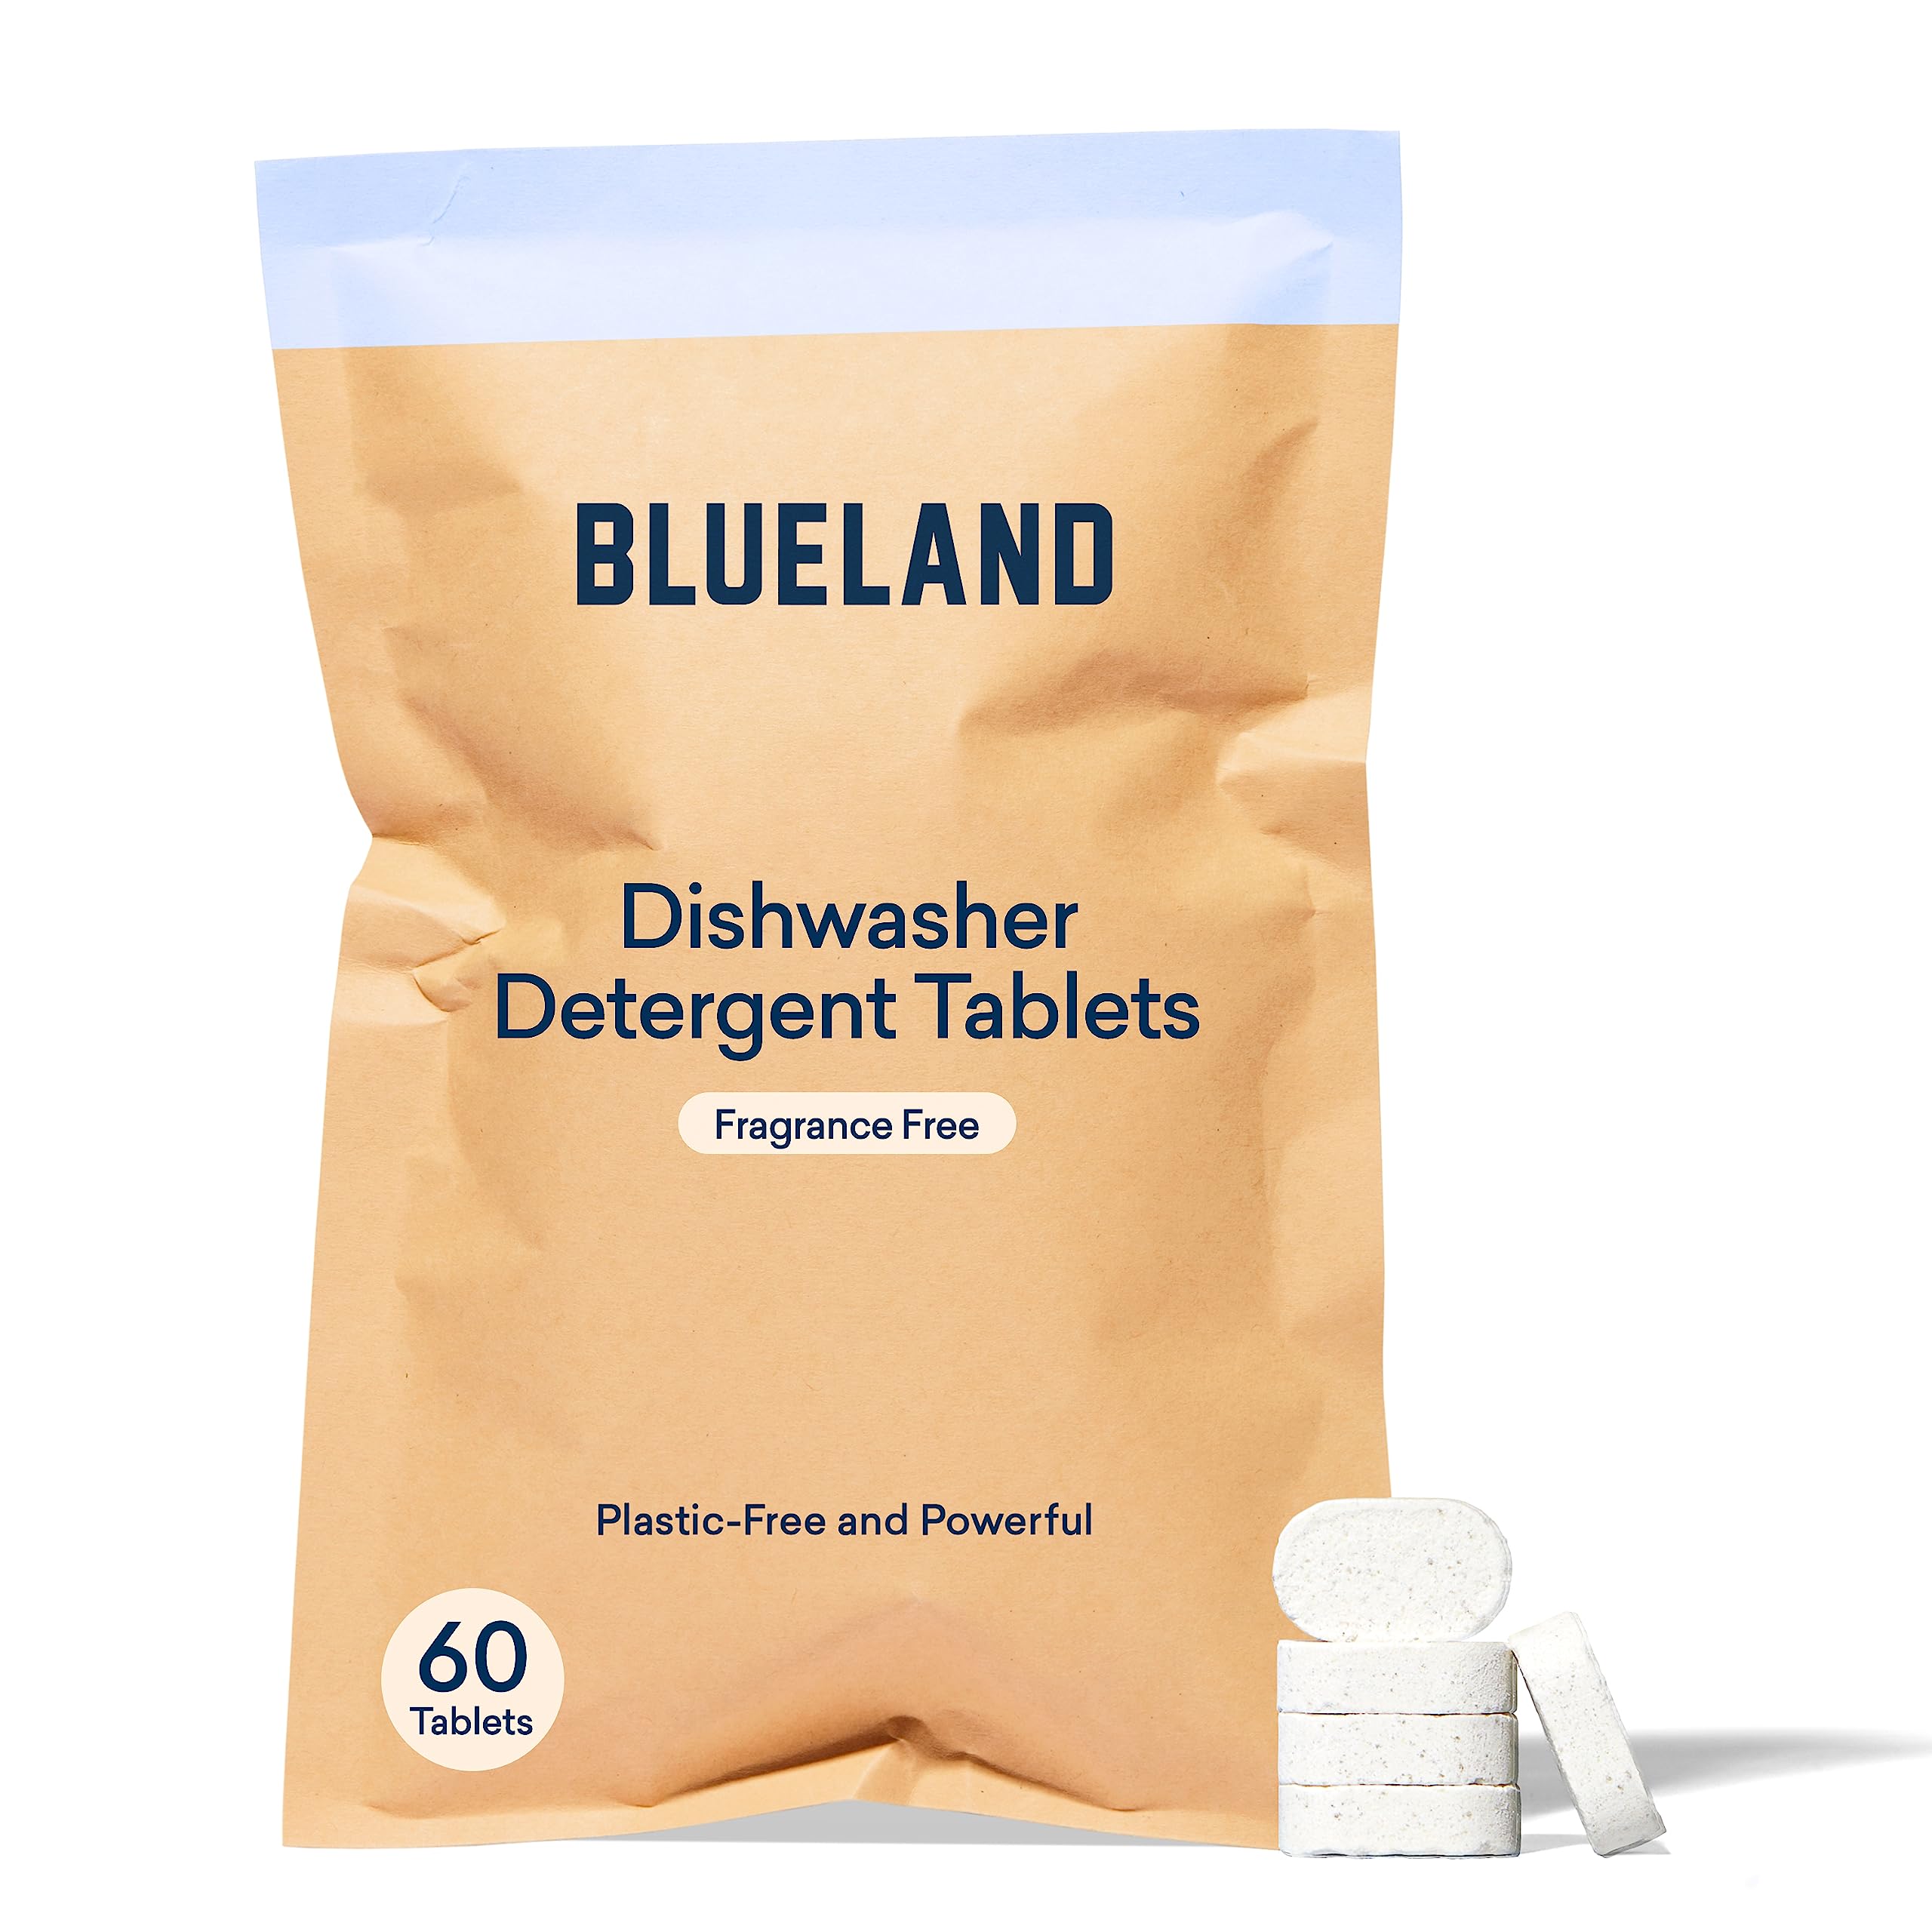 BLUELAND Dishwasher Detergent Tablet Refill 1 Pack, 60 Count - Plastic-Free Alternative to Liquid Pods or Sheets - Natural, Sustainable, Eco Friendly Dishwasher Detergent - 60 Washes